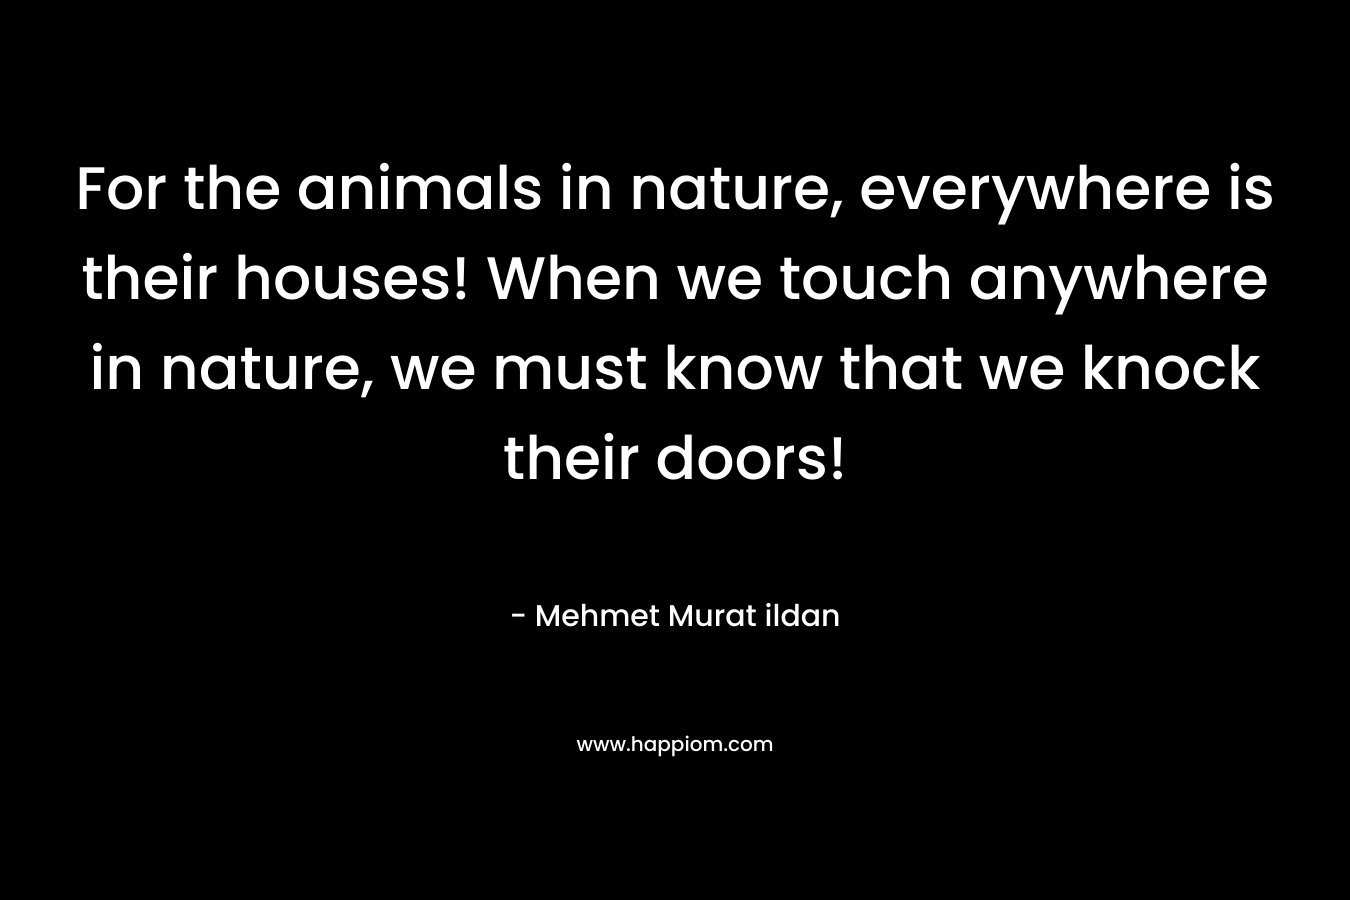 For the animals in nature, everywhere is their houses! When we touch anywhere in nature, we must know that we knock their doors! – Mehmet Murat ildan